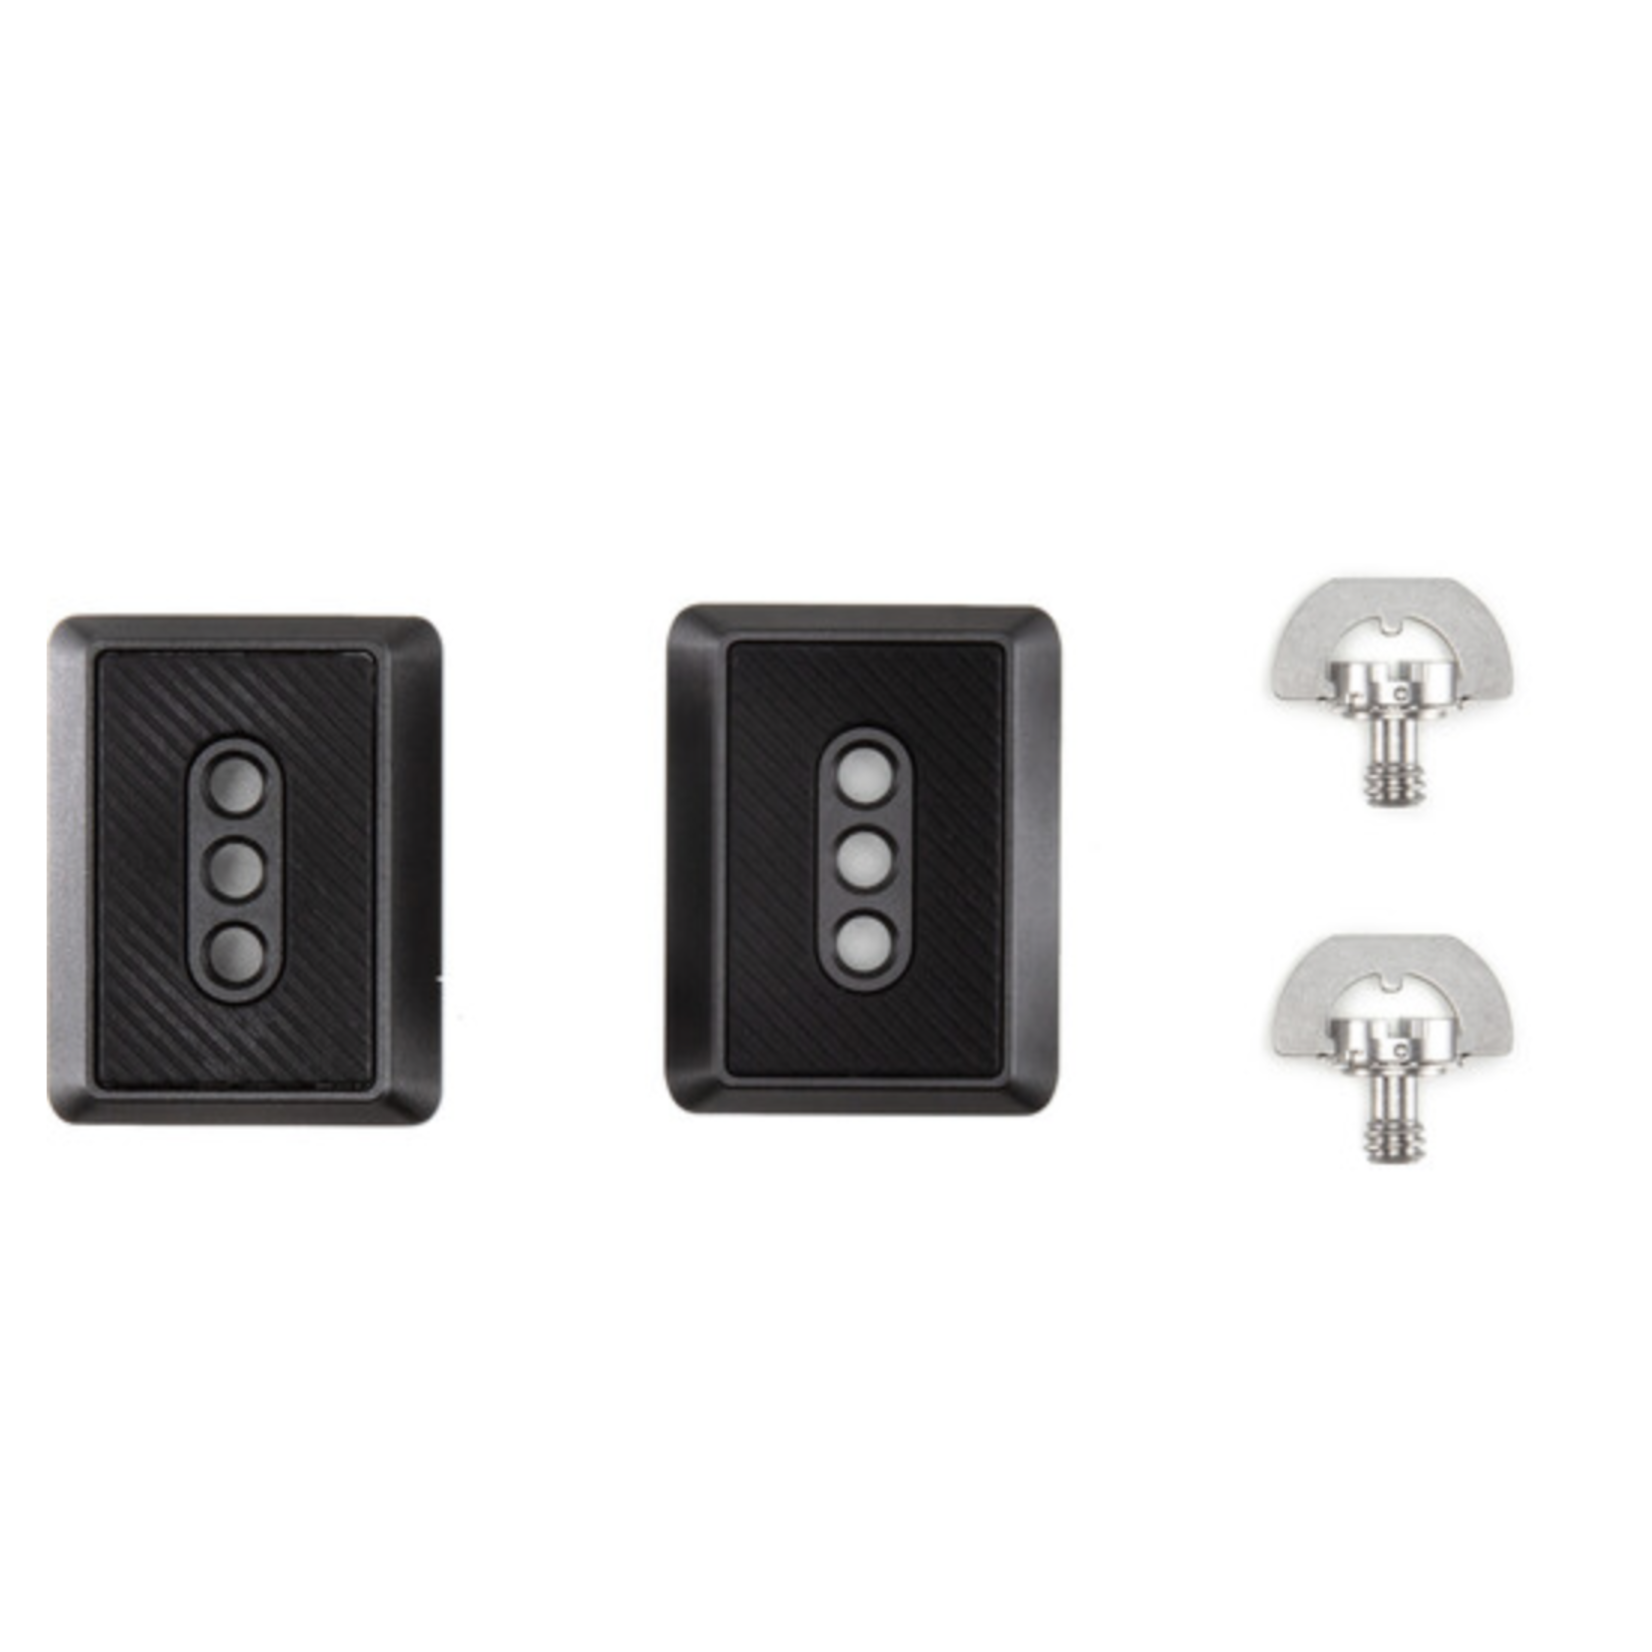 DJI DJI R Quick Release Plate for RS 2 & RSC 2 (Upper)